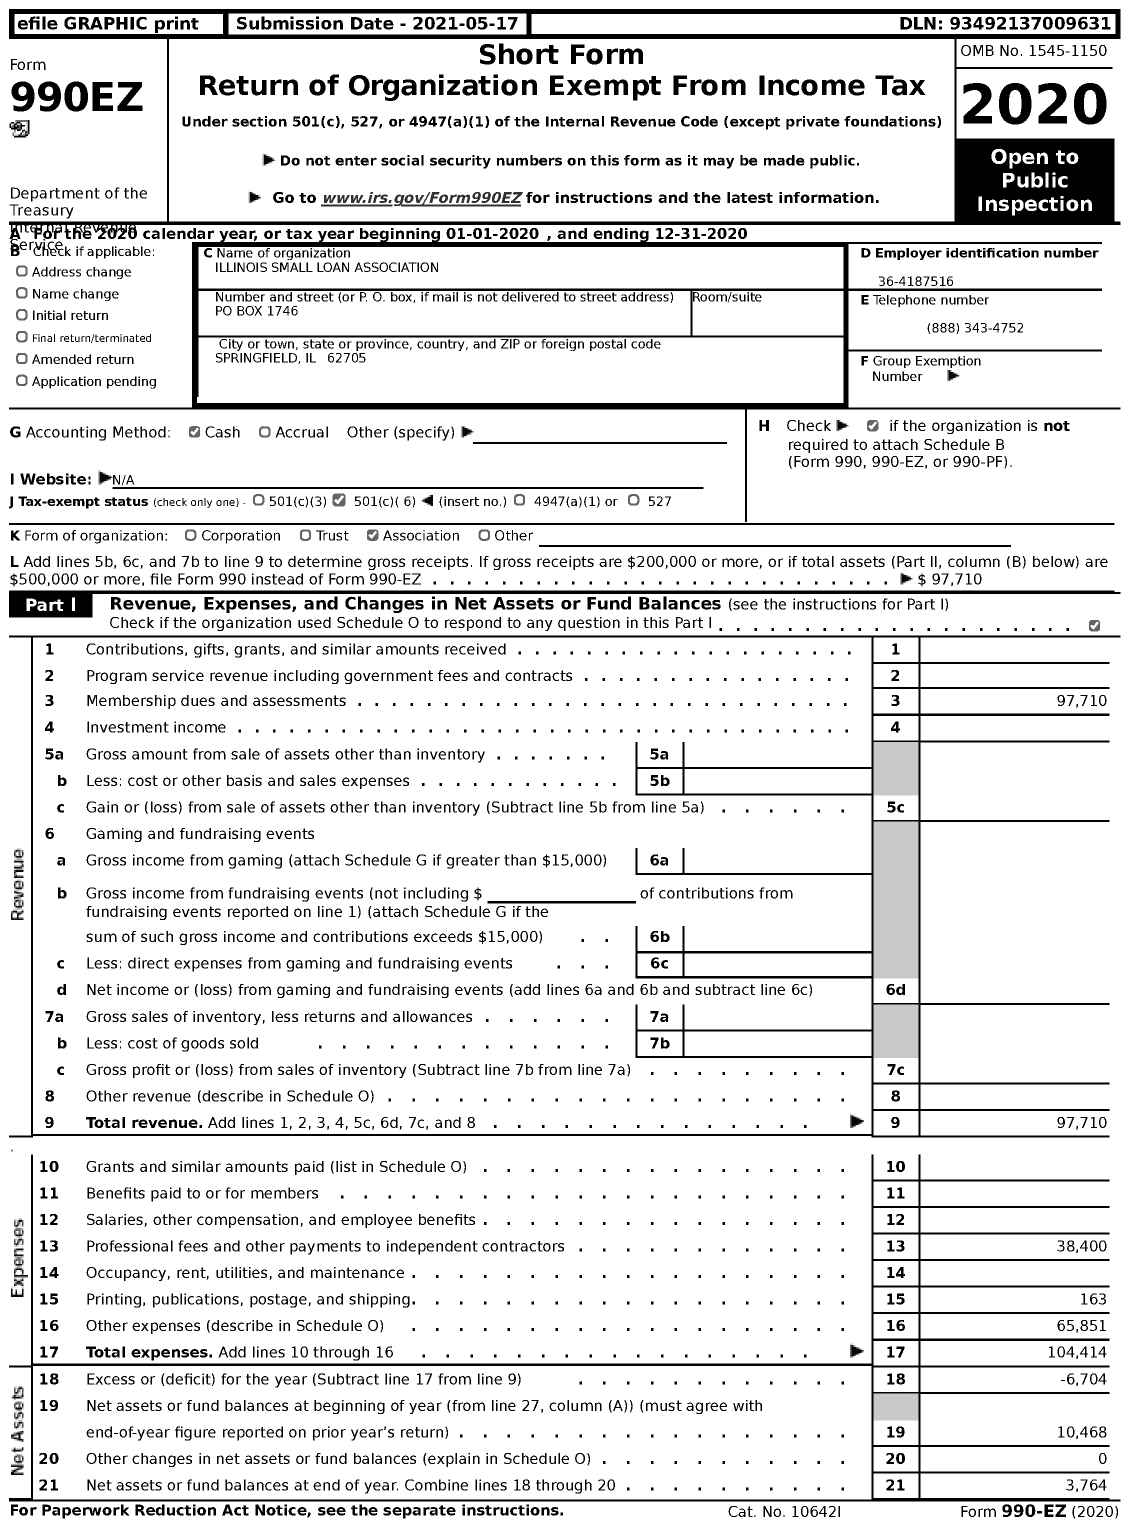 Image of first page of 2020 Form 990EZ for Illinois Small Loan Association